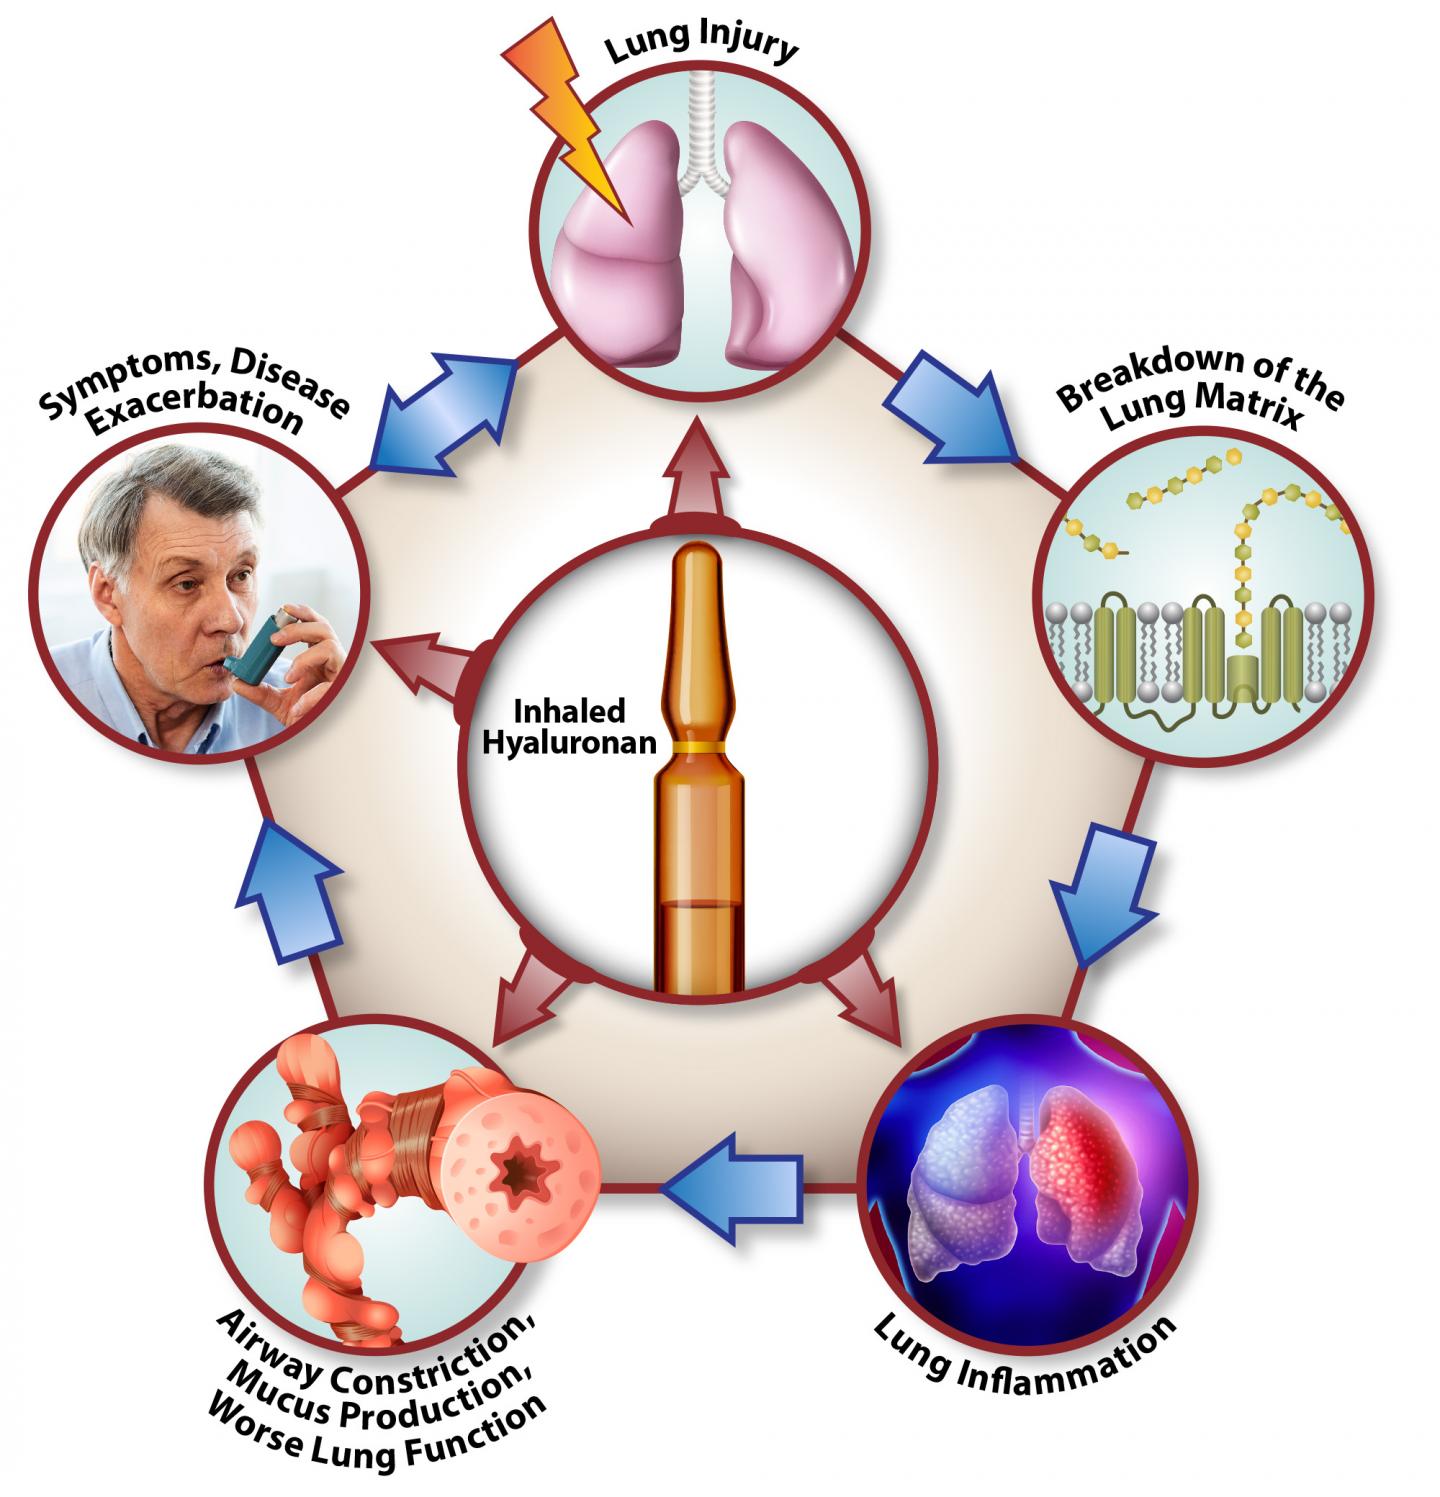 How Inhaled Hyaluronan Affects the COPD cycle